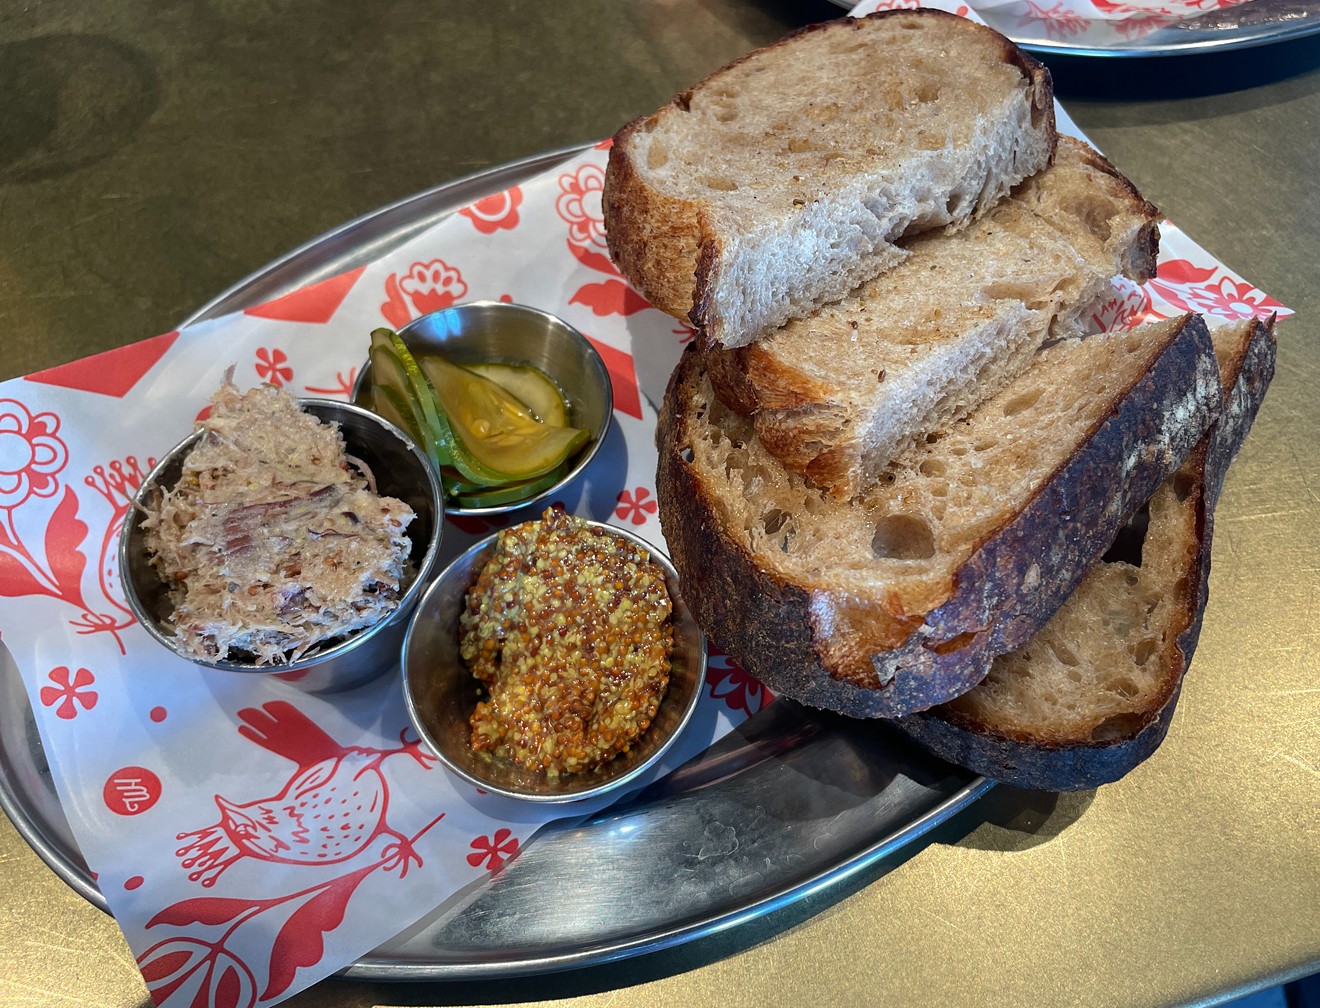 Rich pork rillettes are served with mustard, pickles and rye bread.